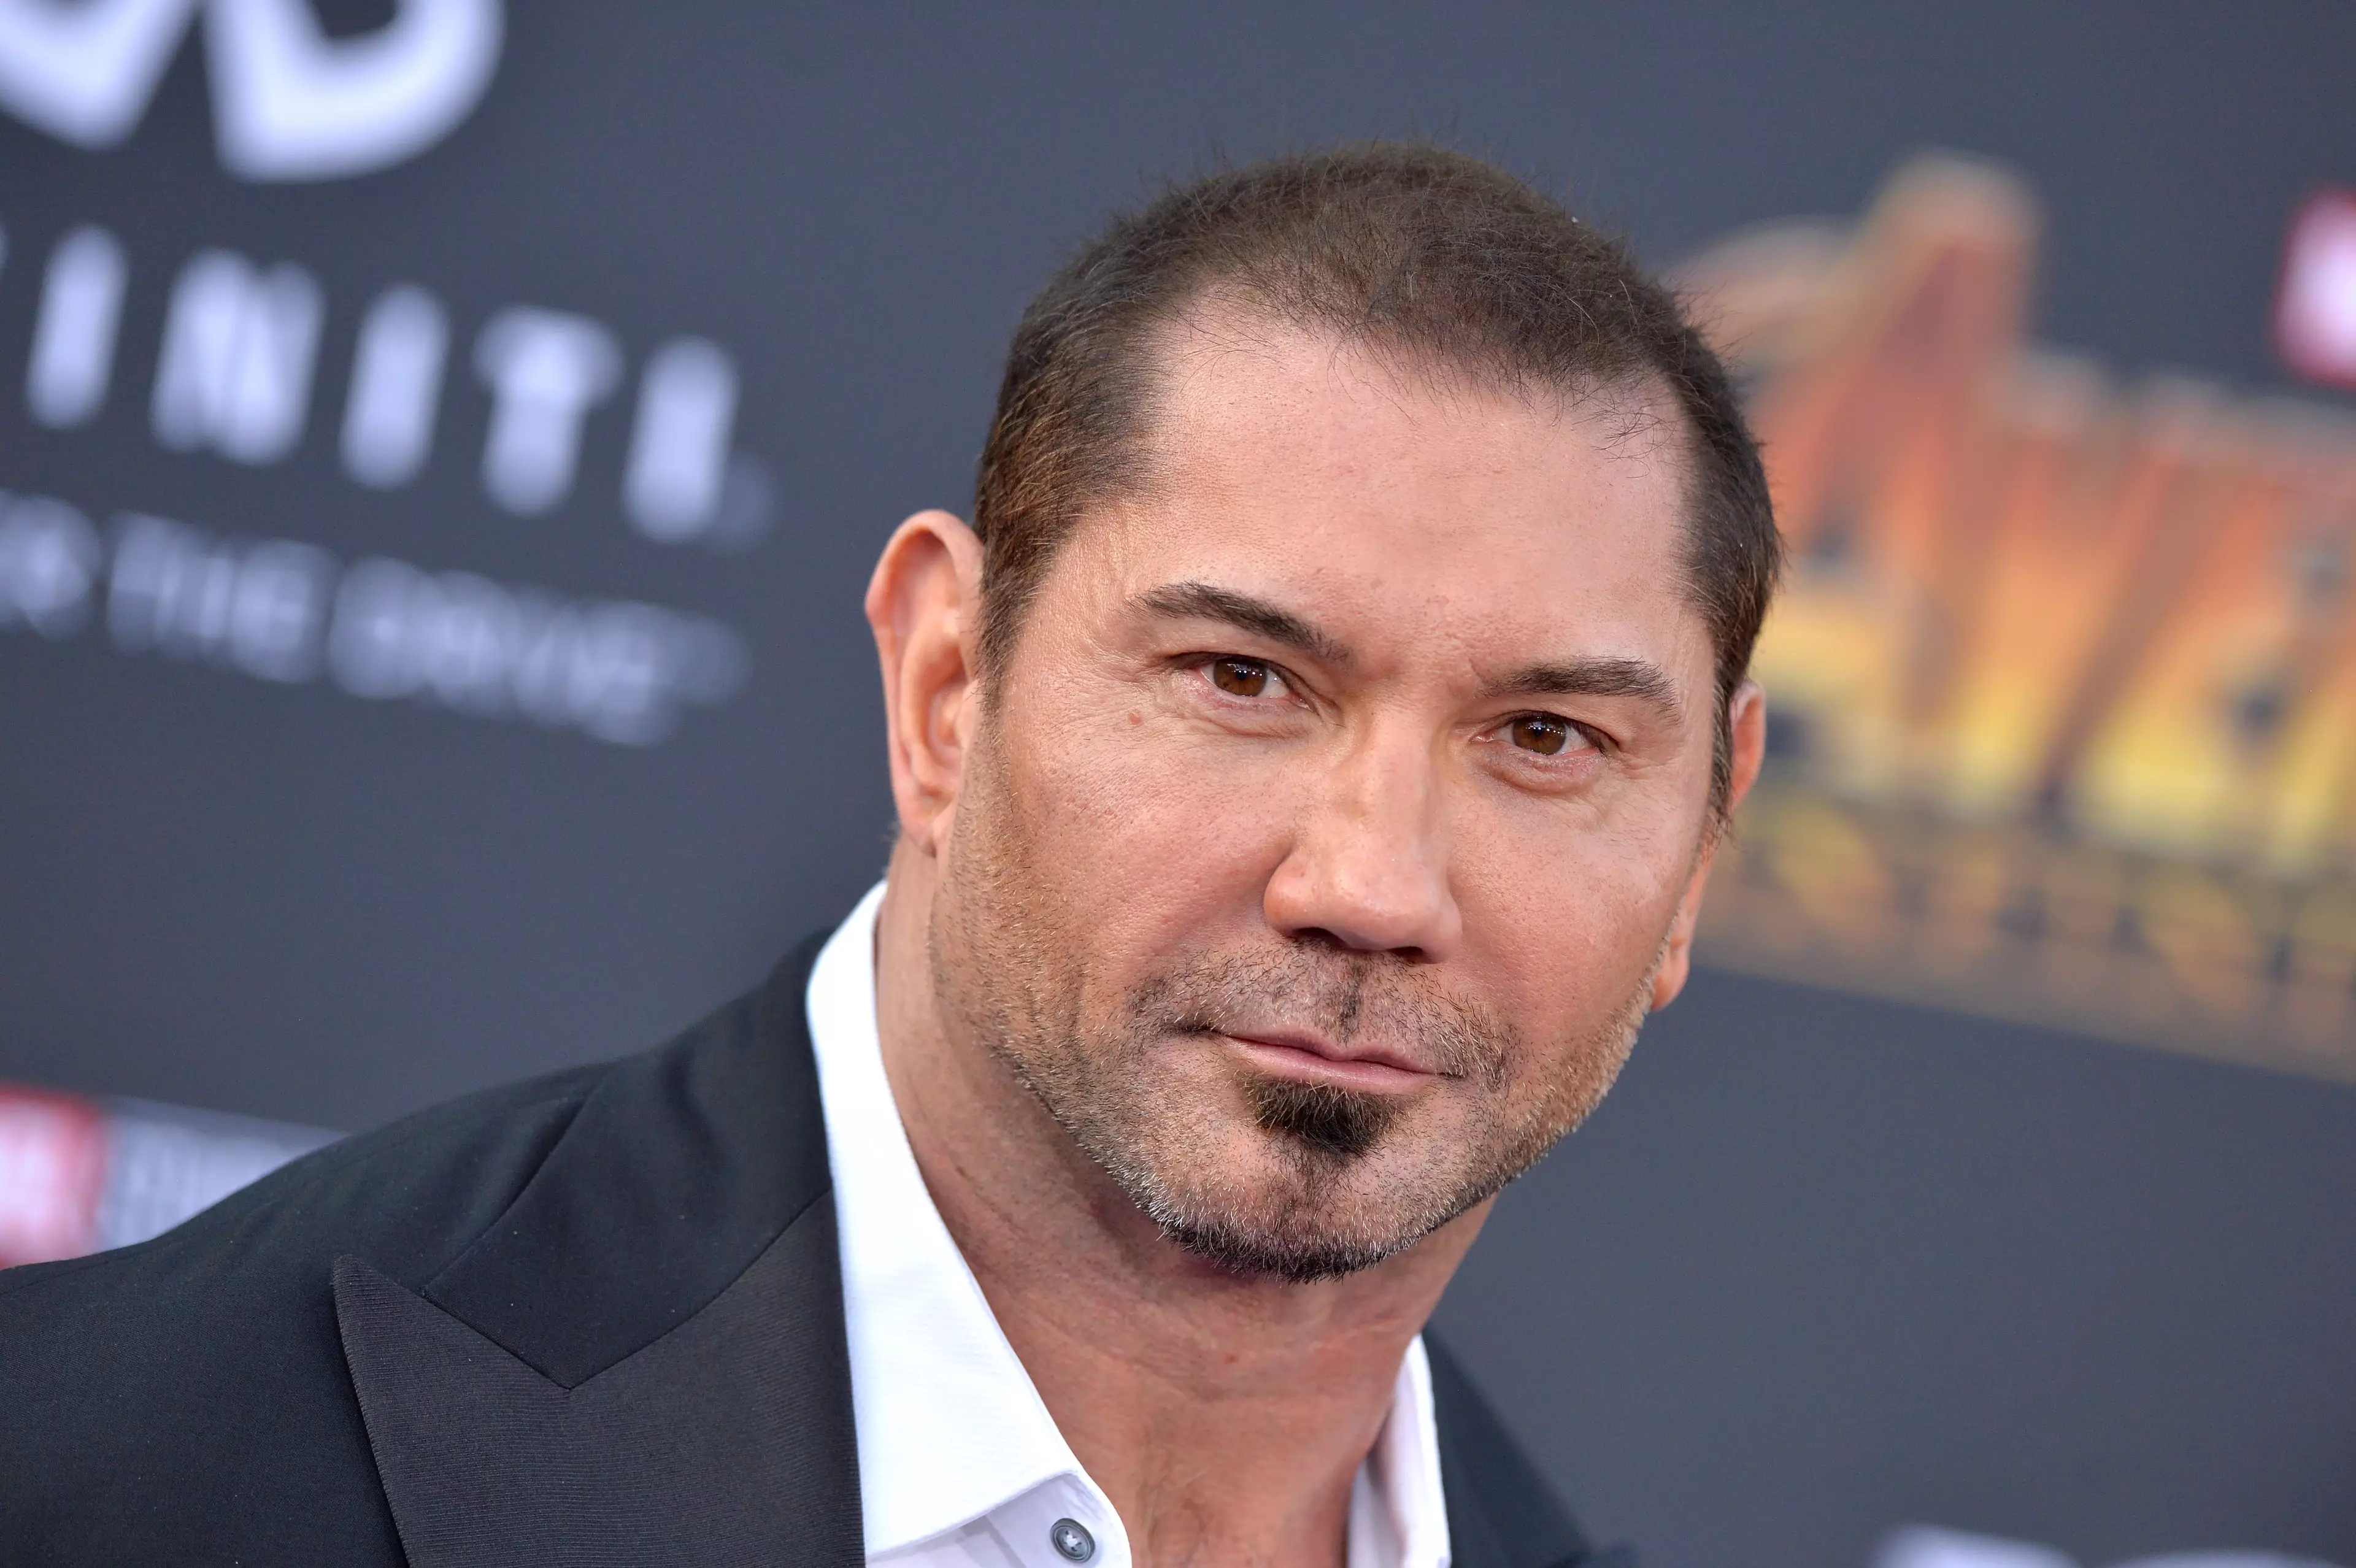 Dave Bautista at the Avengers: Endgame premiere.